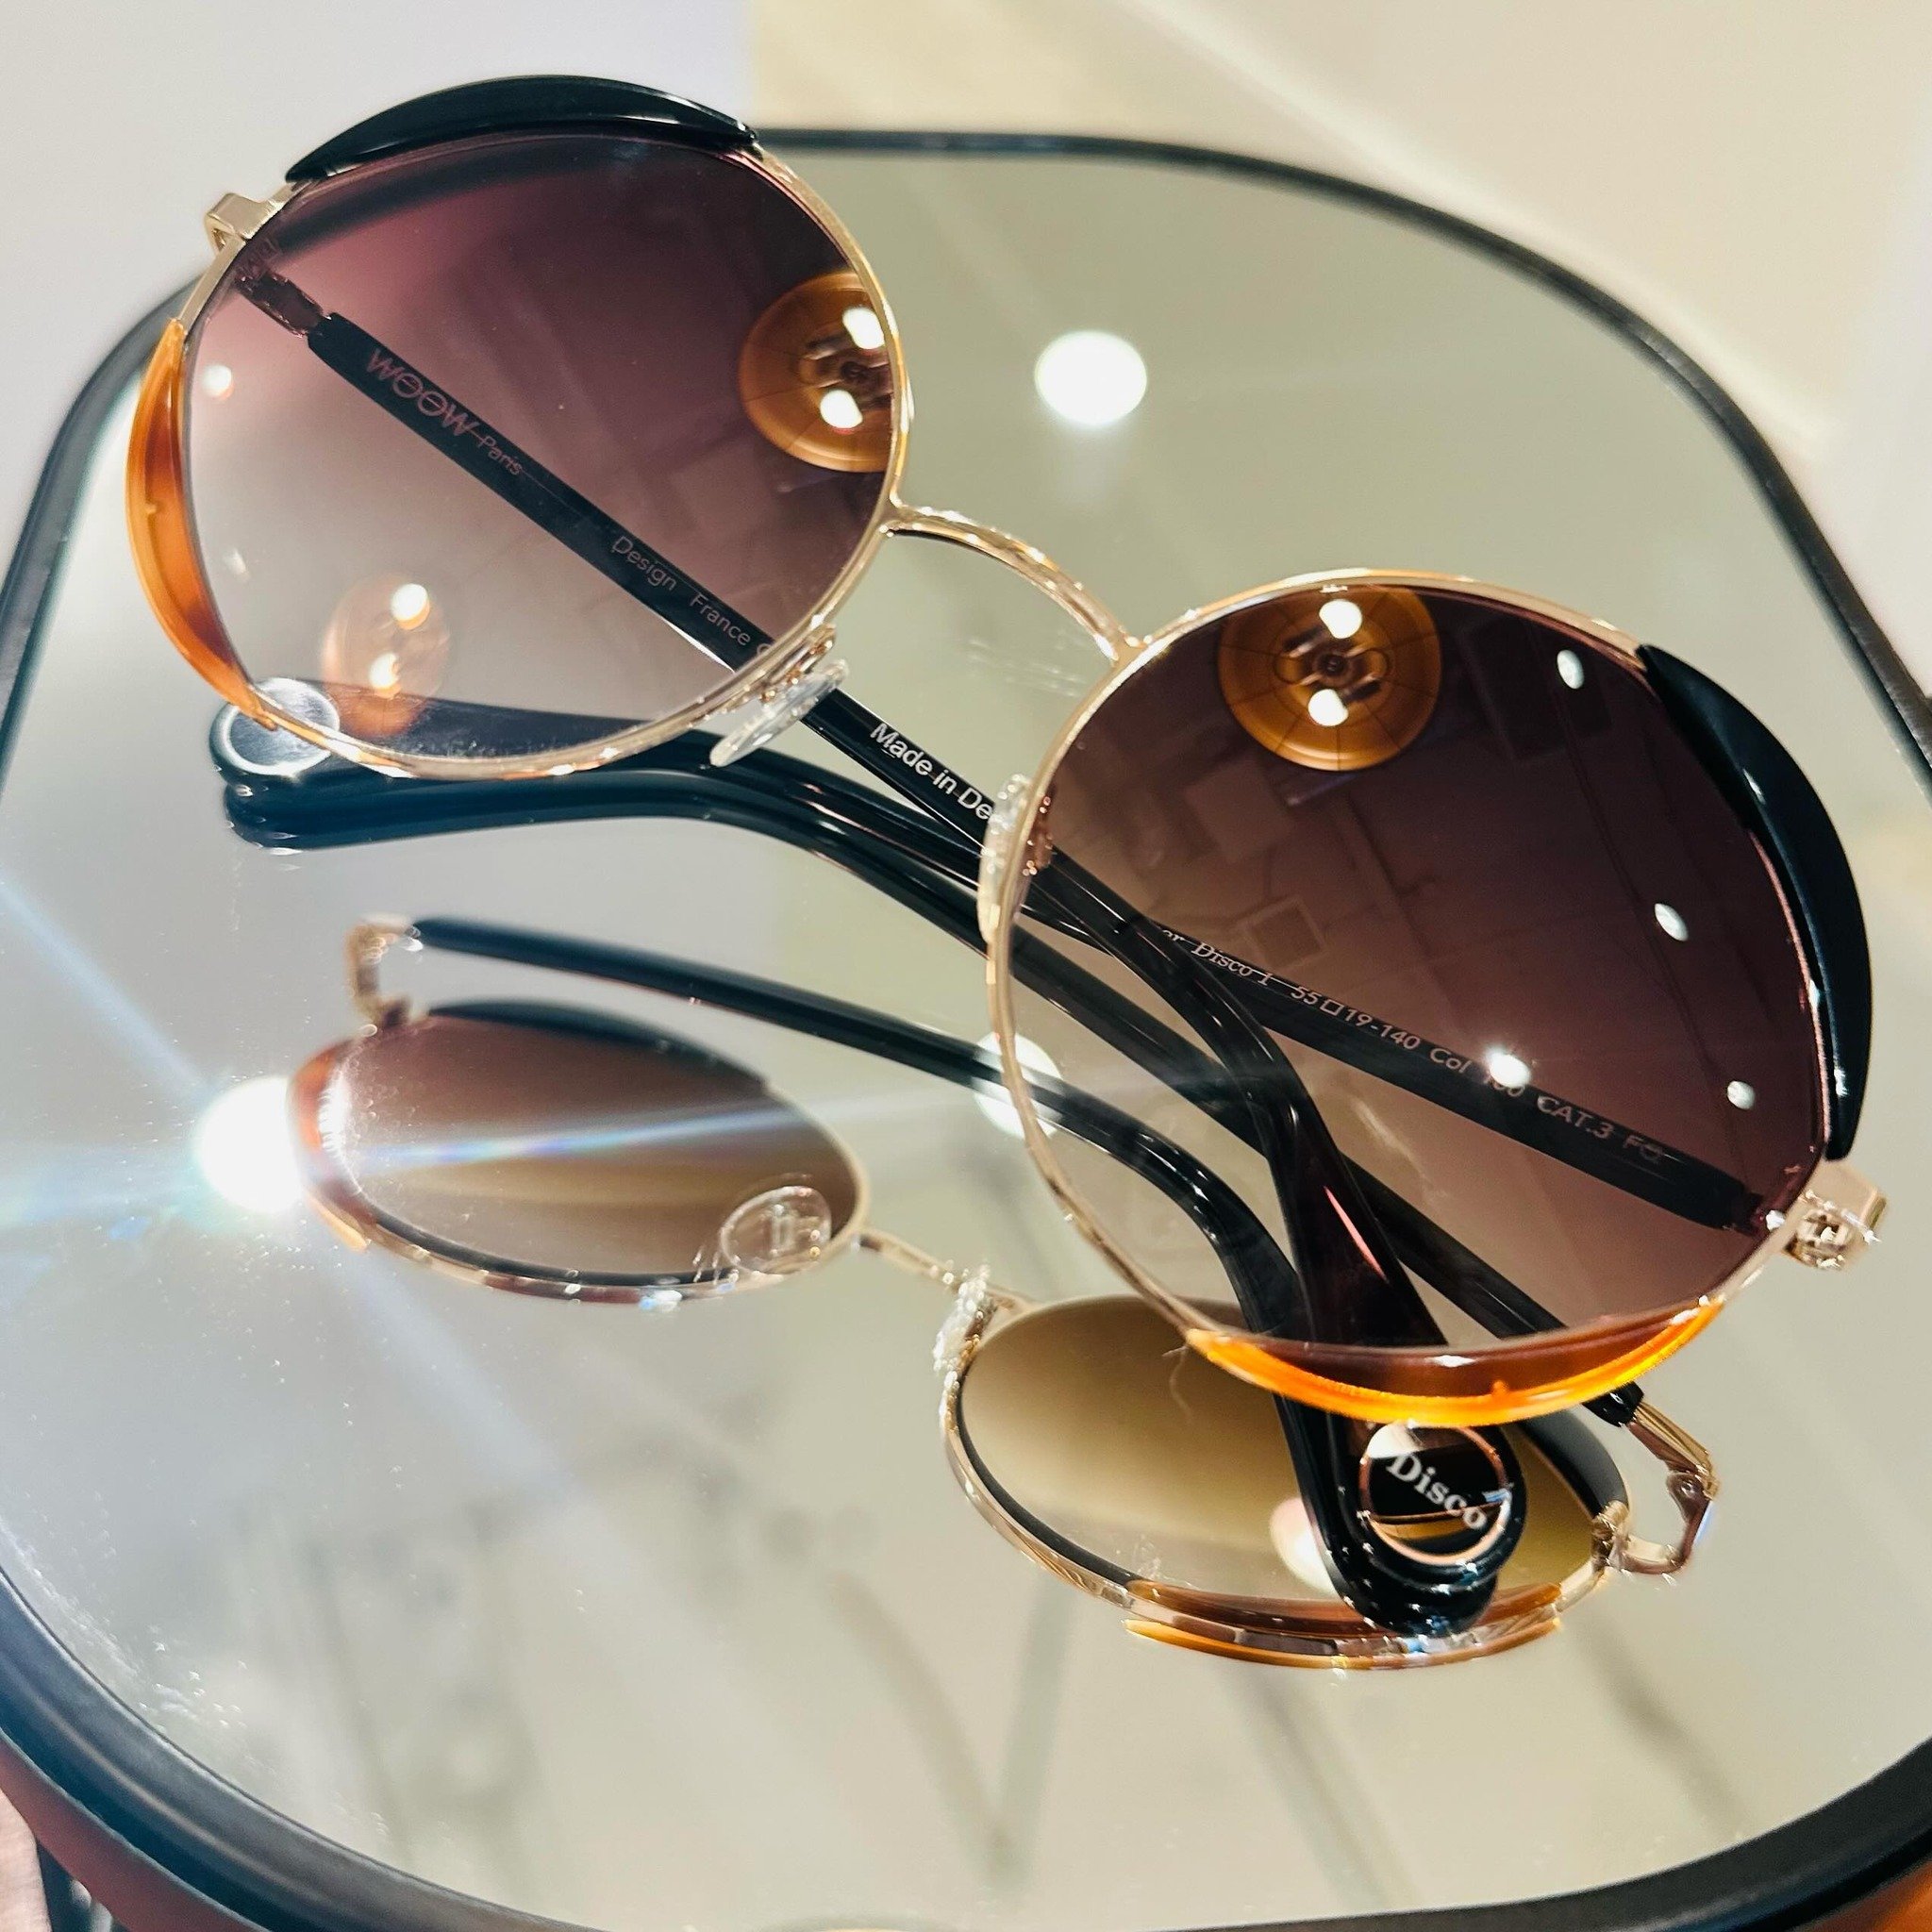 We are starting to get more and more of those sunny days around here ☀️ It&rsquo;s got us excited for summer, and these @wooweyewear sunnies that will make YOU shine bright from every angle!! 😍🙌🏻😎 #wooweyewear #sunnydays #summervibes #eyes #eyegl